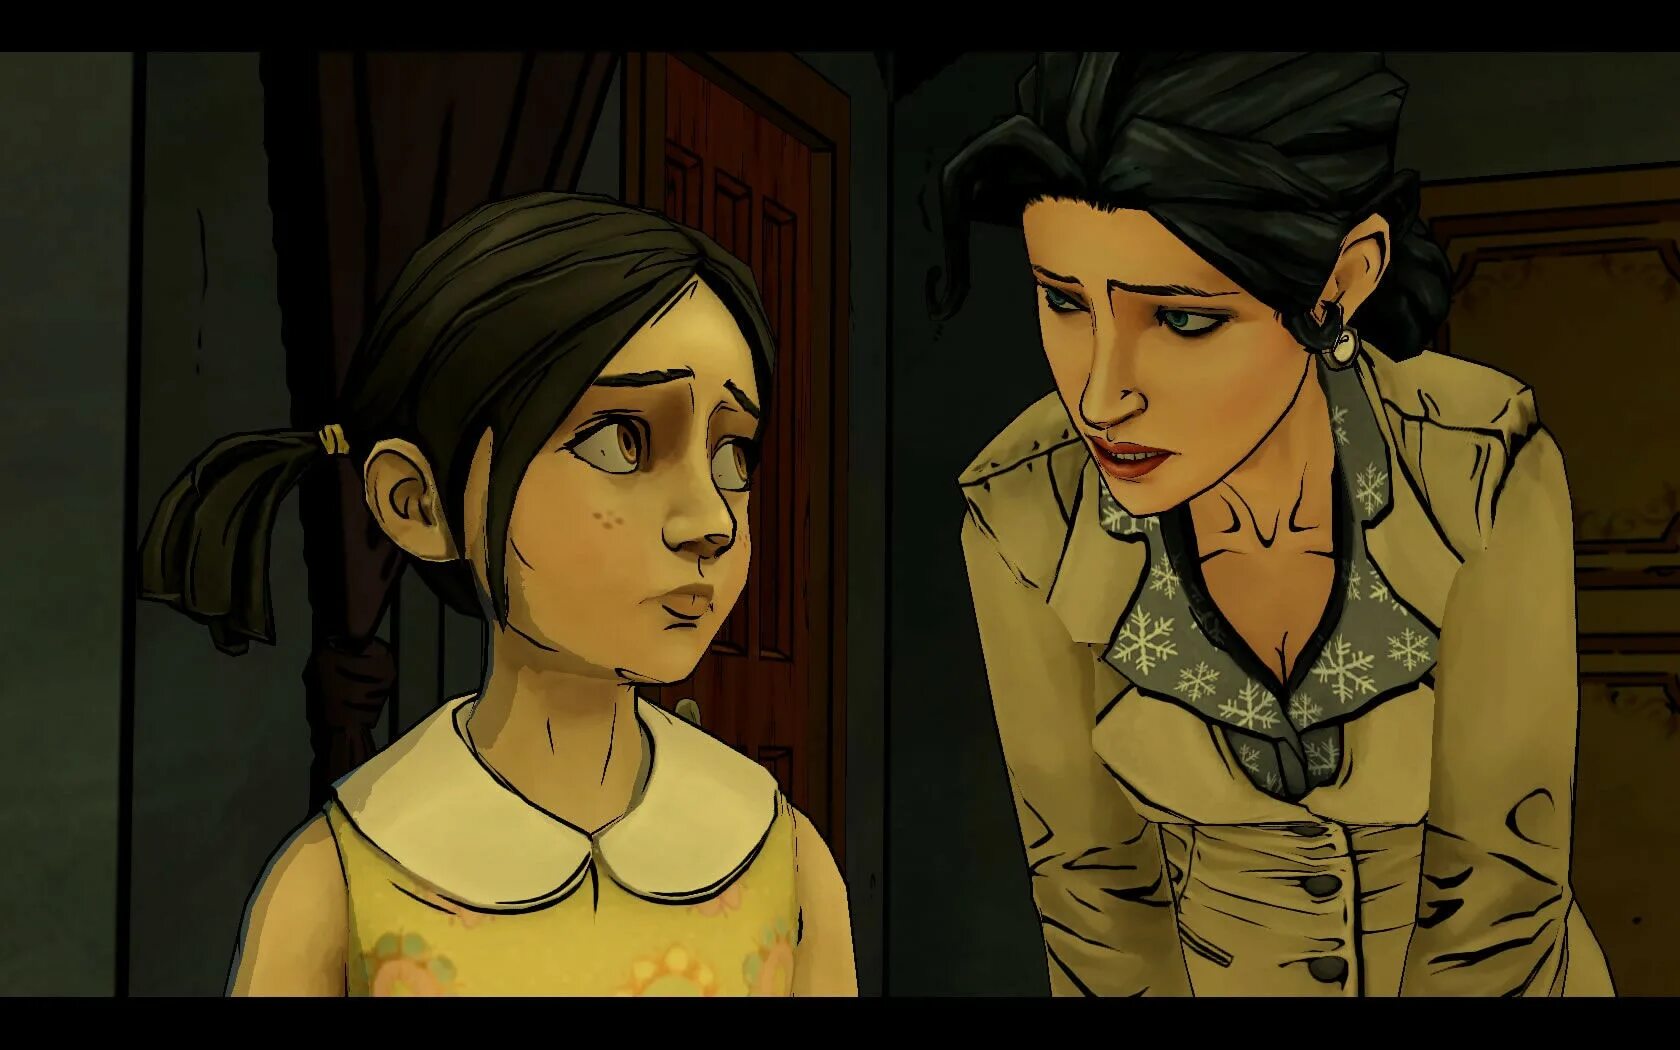 The Wolf among us Рэйчел. The Wolf among us Рейчел Рейчел. The Wolf among Рэйчел.